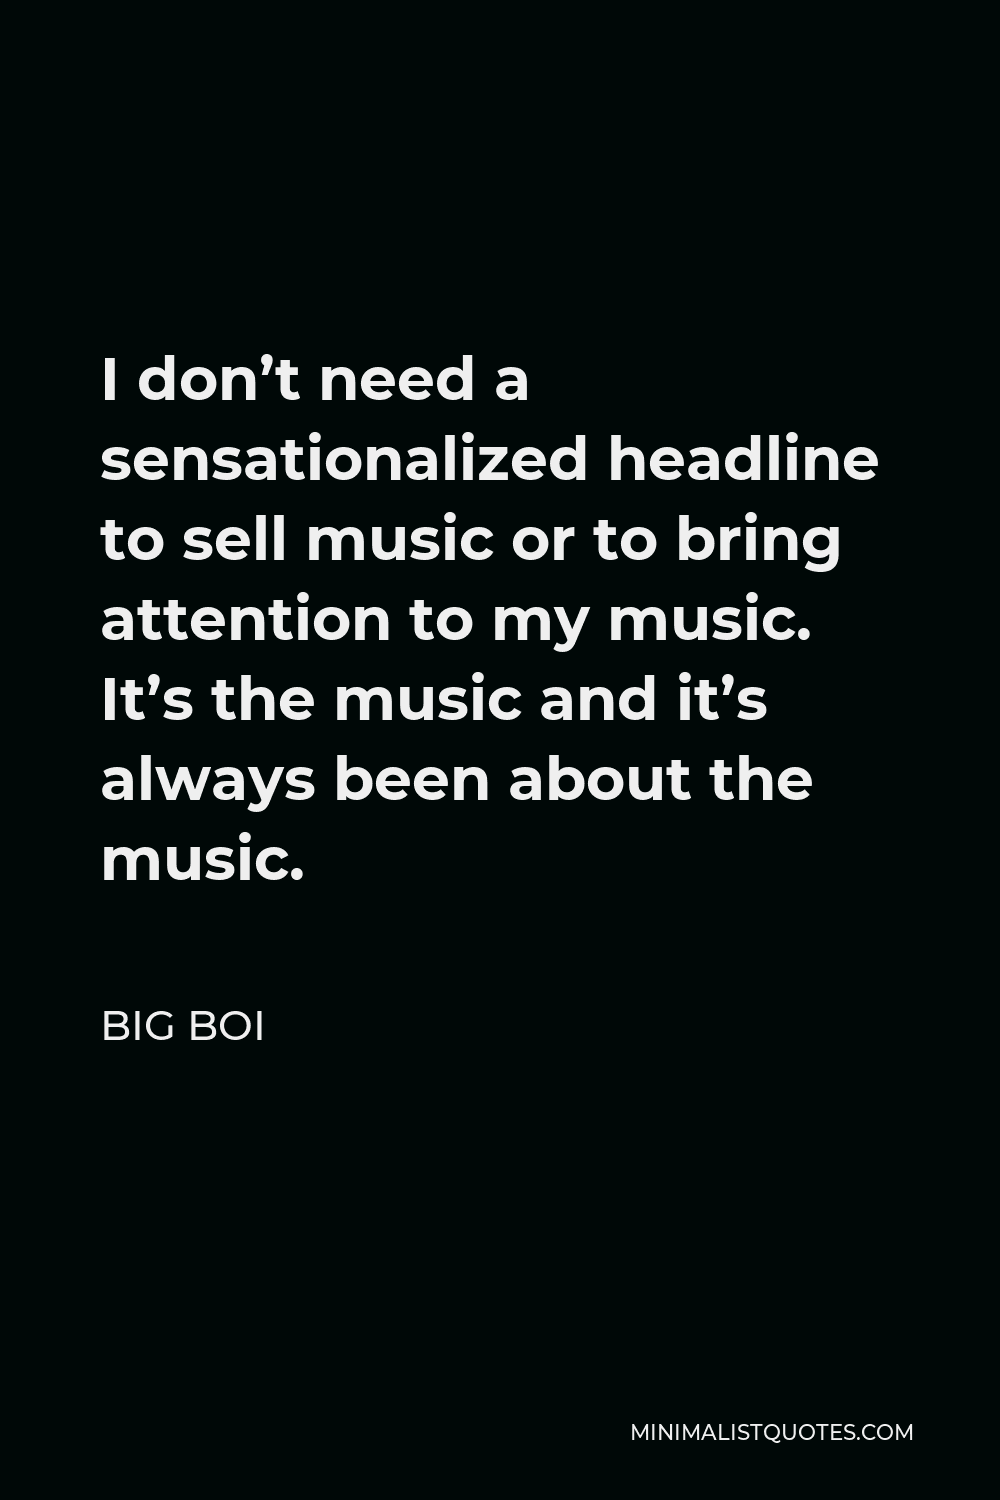 Big Boi Quote - I don’t need a sensationalized headline to sell music or to bring attention to my music. It’s the music and it’s always been about the music.